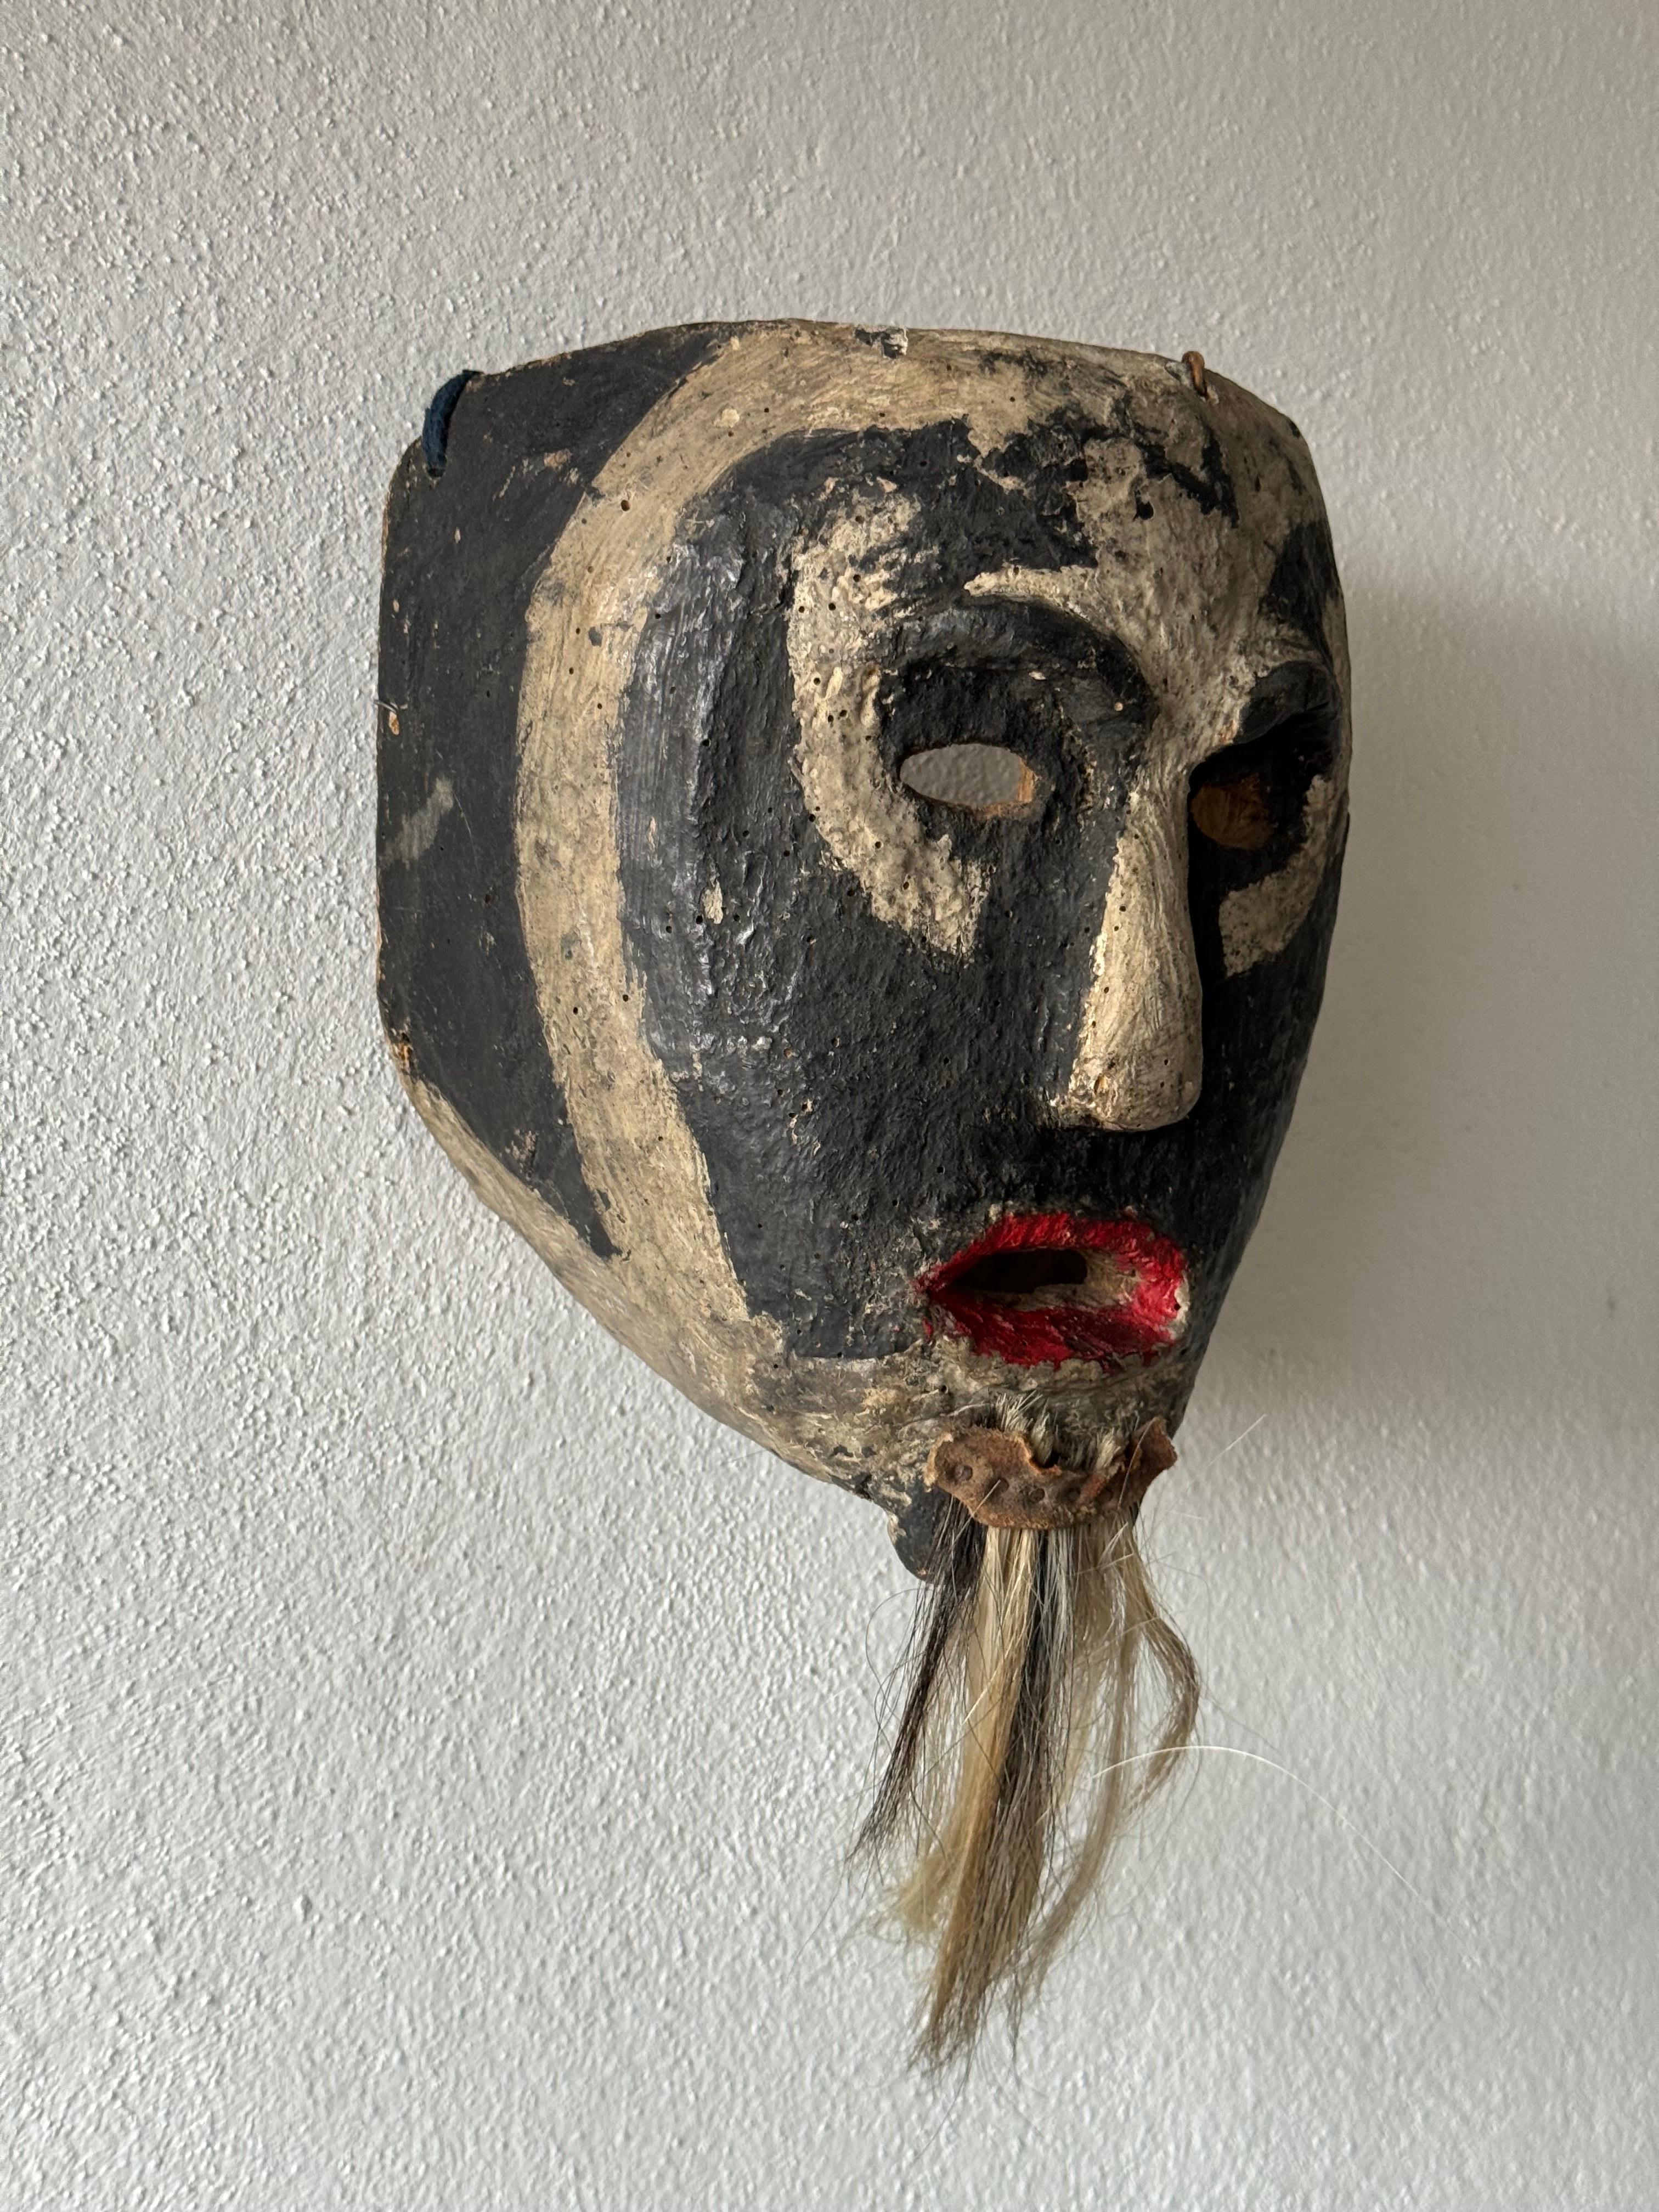 Xantolo mask from the Huasteca region of Hidalgo. This rare collector's mask was acquired from the town of Tzapotitla in the municipality of Huazalingo in the mid 1970´s.
The Xantolo celebration is a full blown celebration and tribute to the living